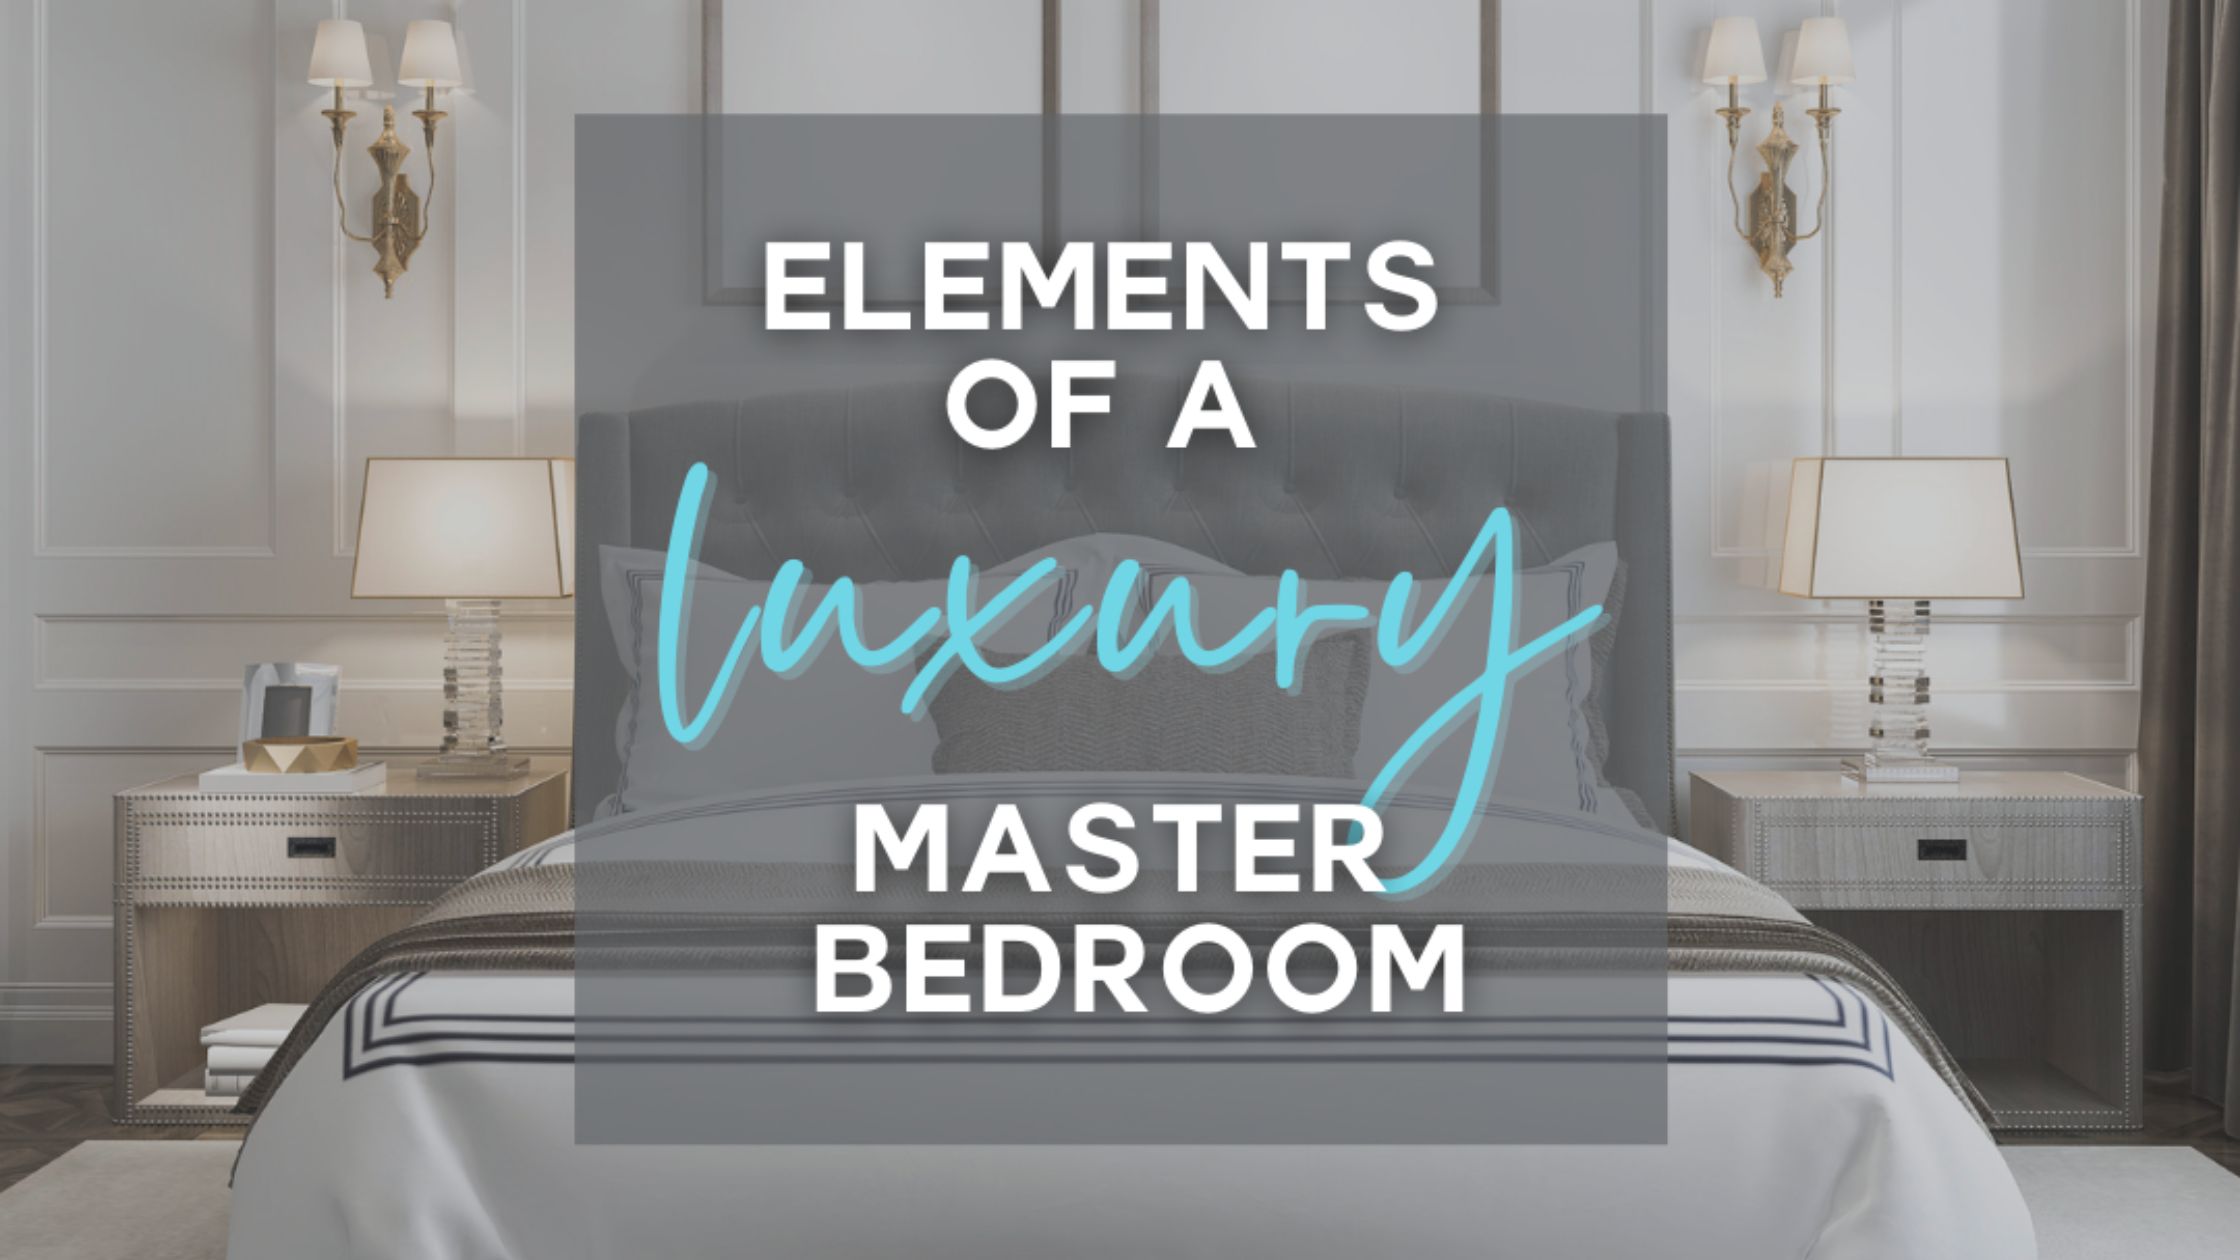 Elements of a Luxury Master Bedroom